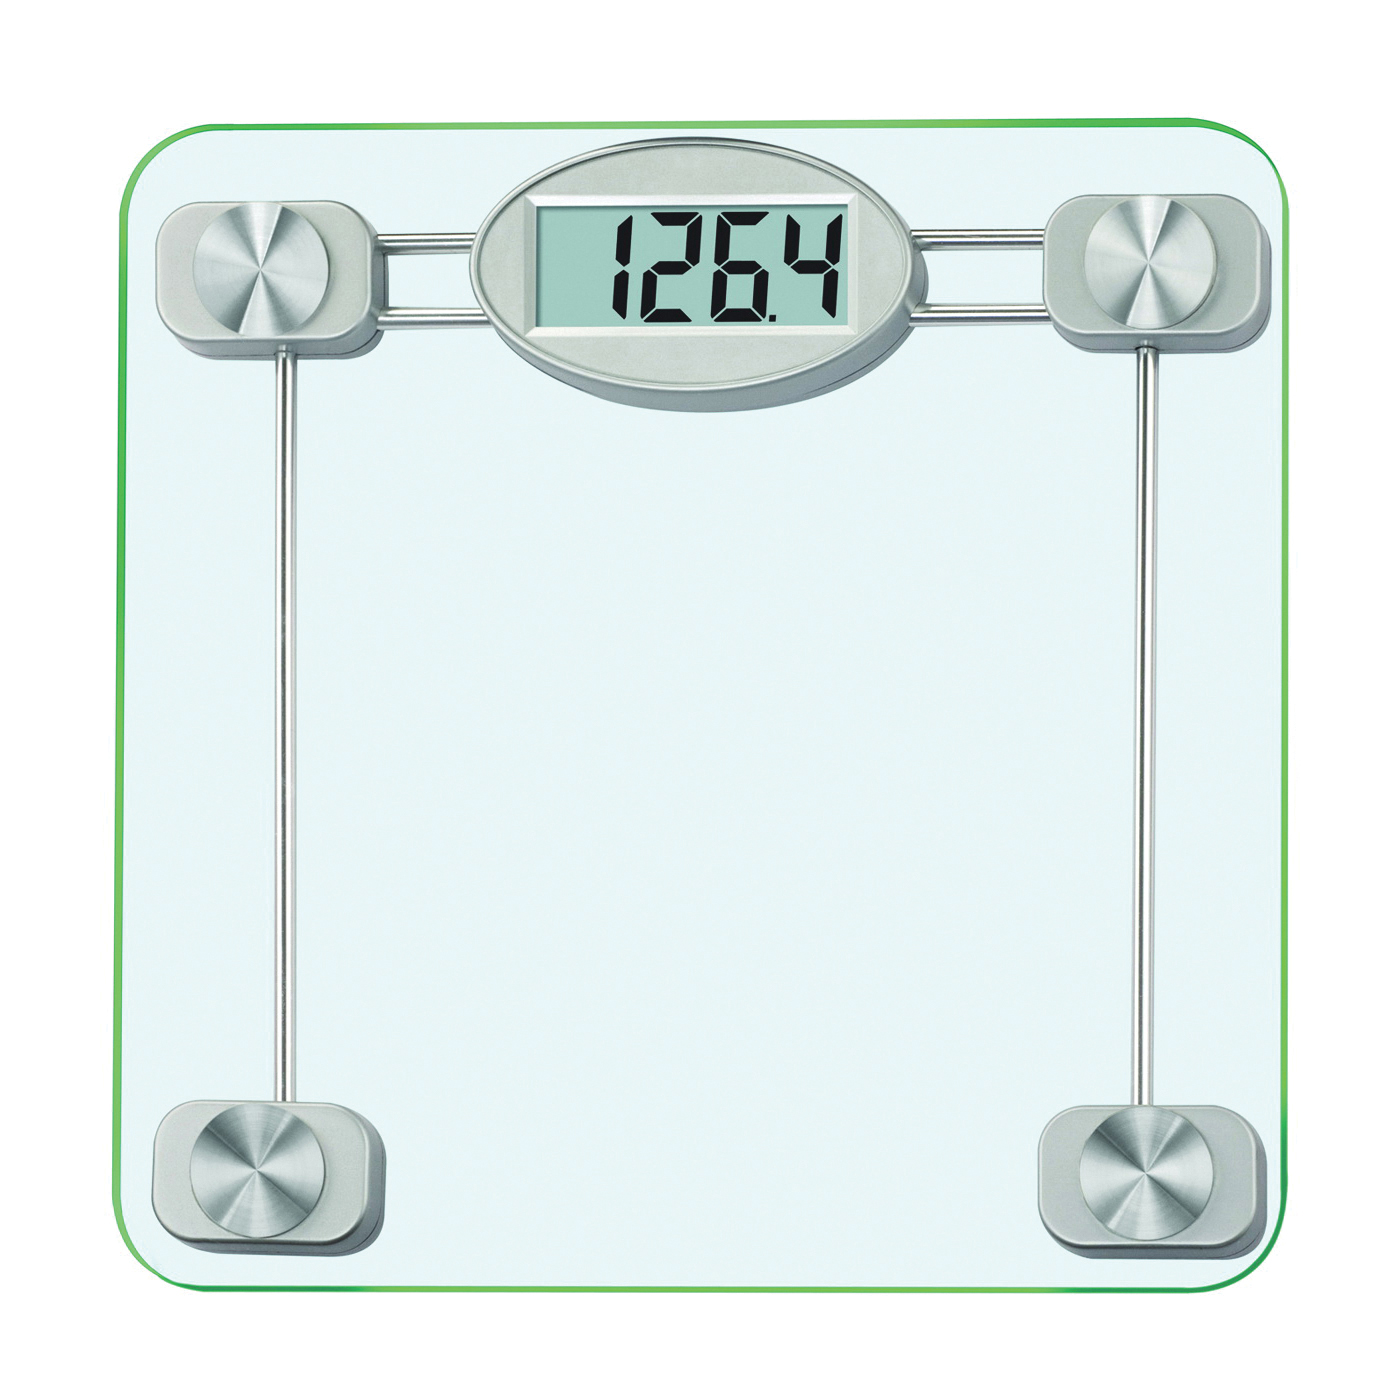 Taylor 3817 11 lb White Compact Digital Scale